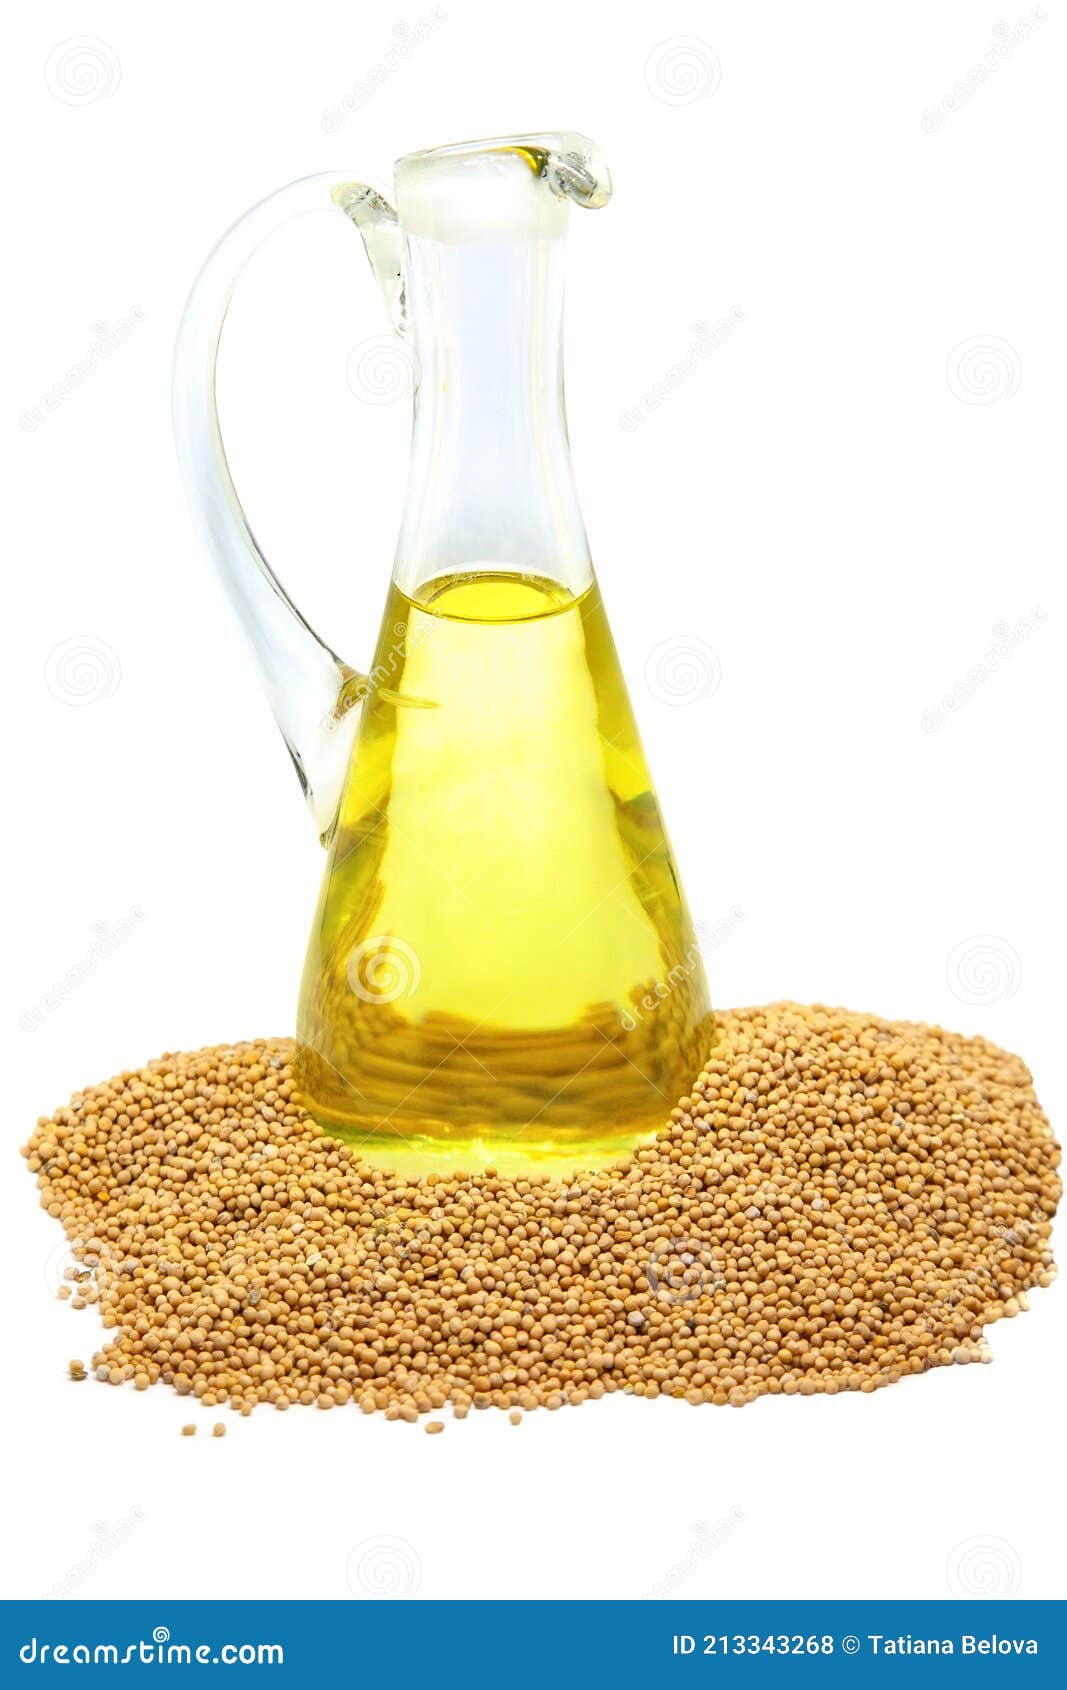 Mustard oil and seeds stock photo. Image of background - 213343268